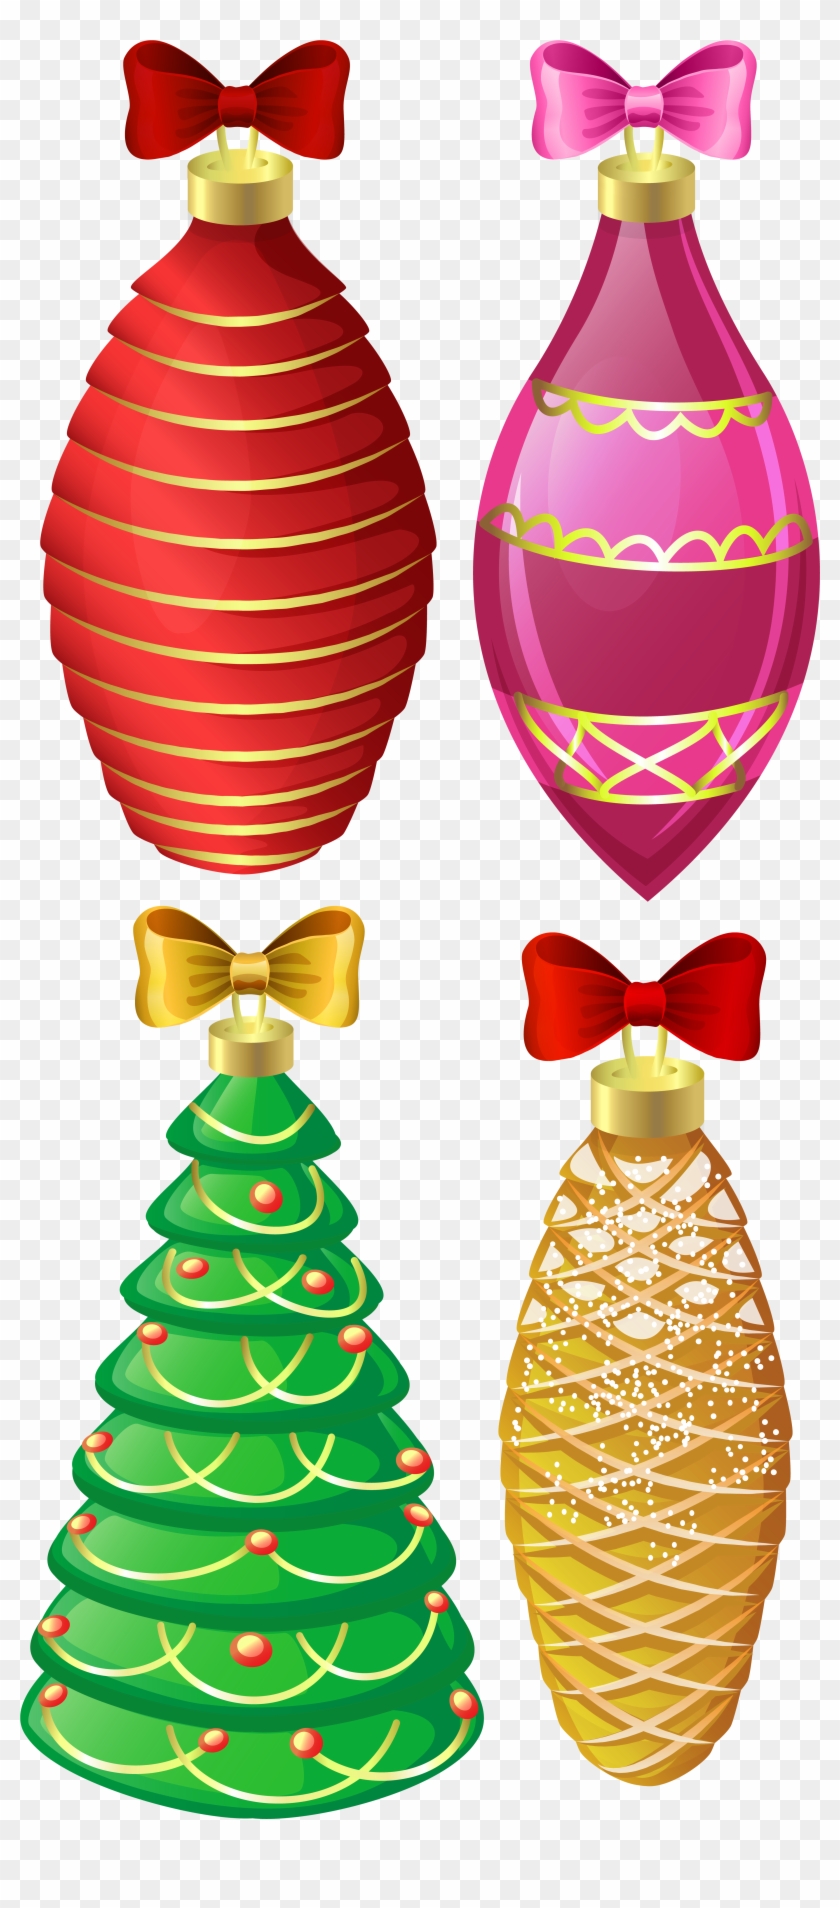 Christmas Ornaments Png Image Clipart #540148